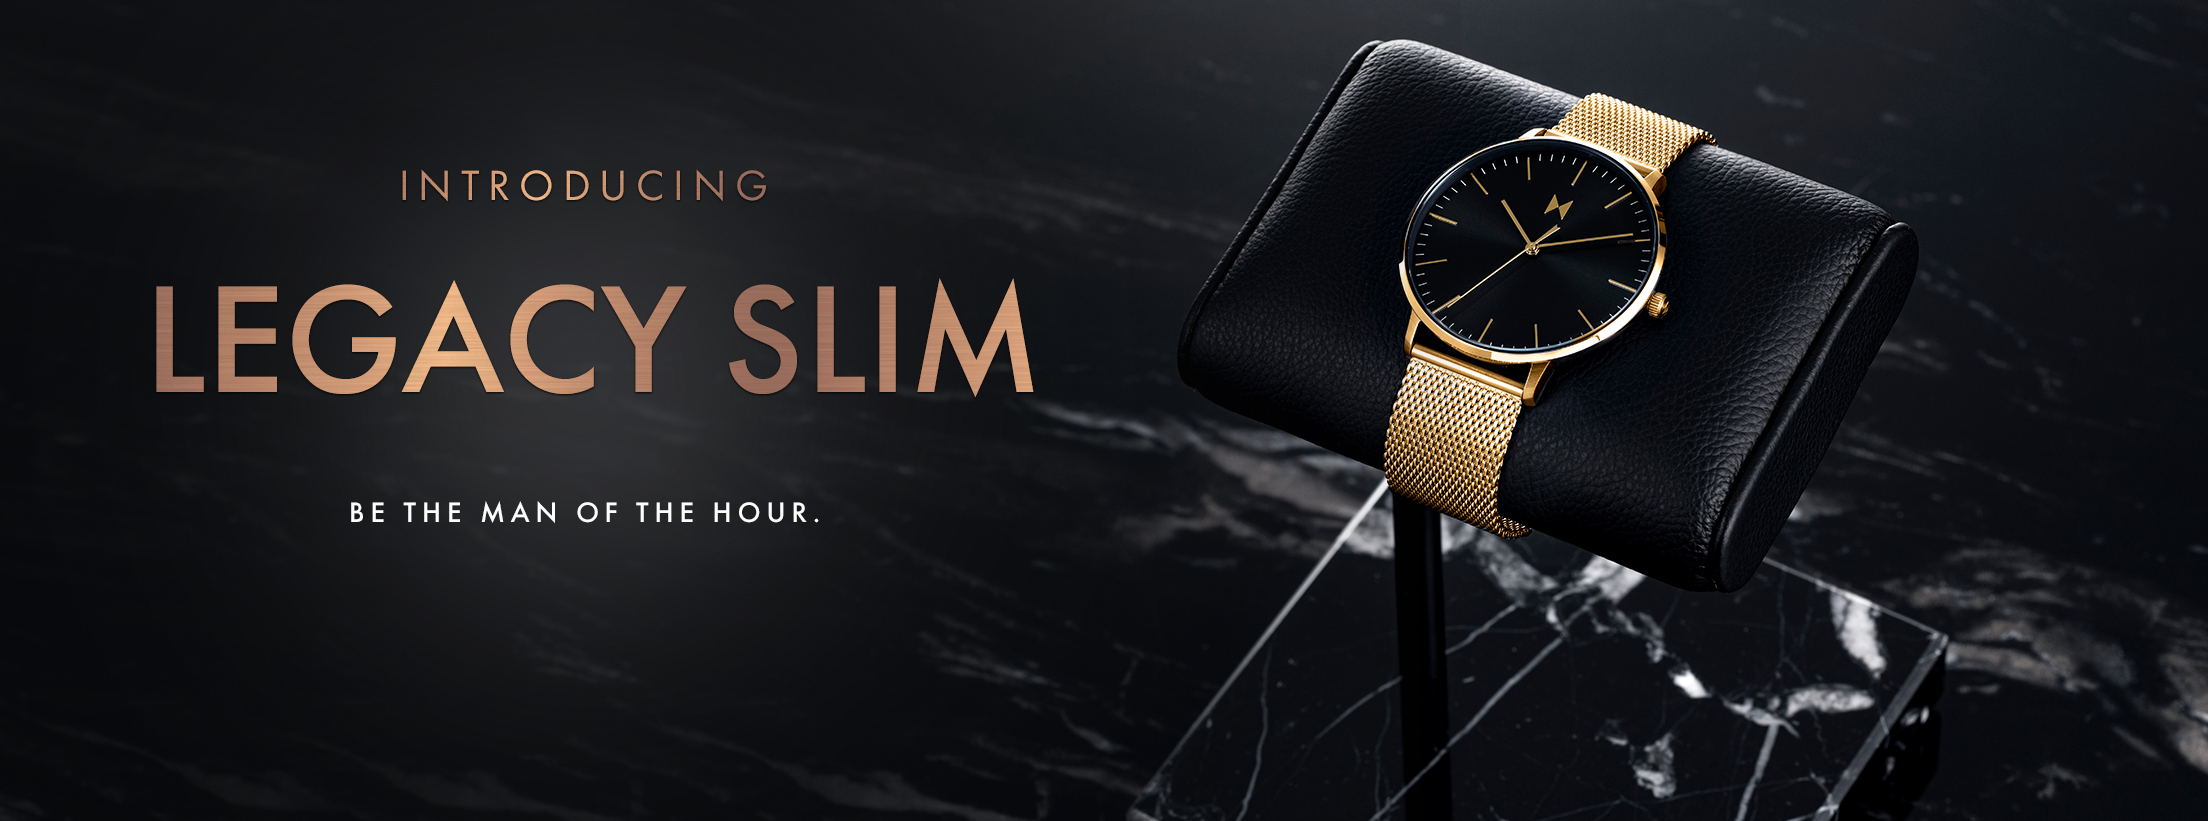 Introducing Legacy Slim. Be the man of the hour.